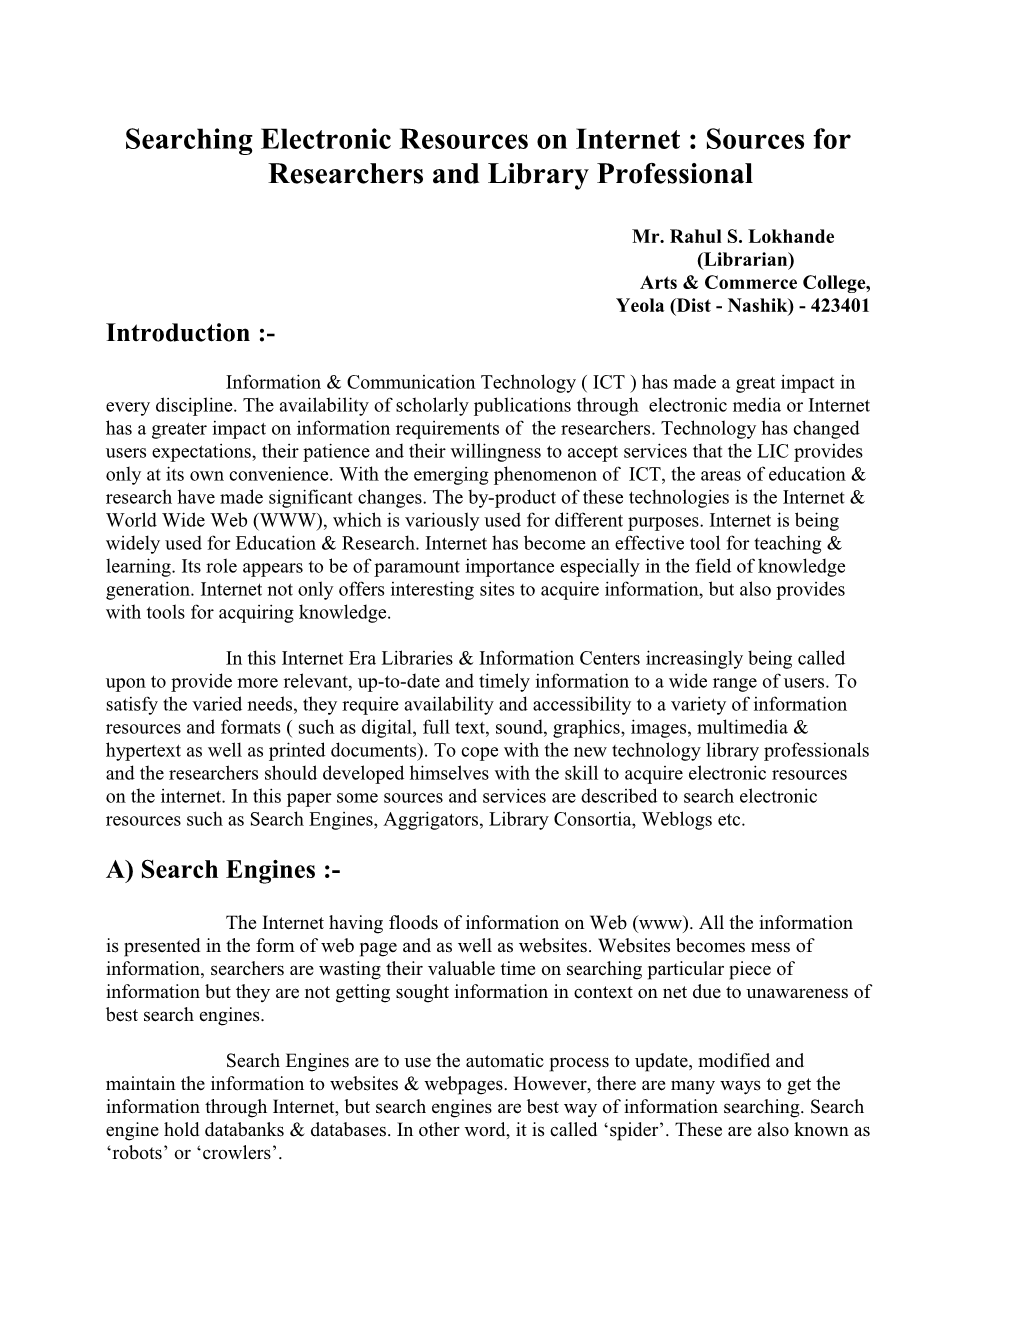 Searching Electronic Resources on Internet : Tools for Researchers and Library Professional